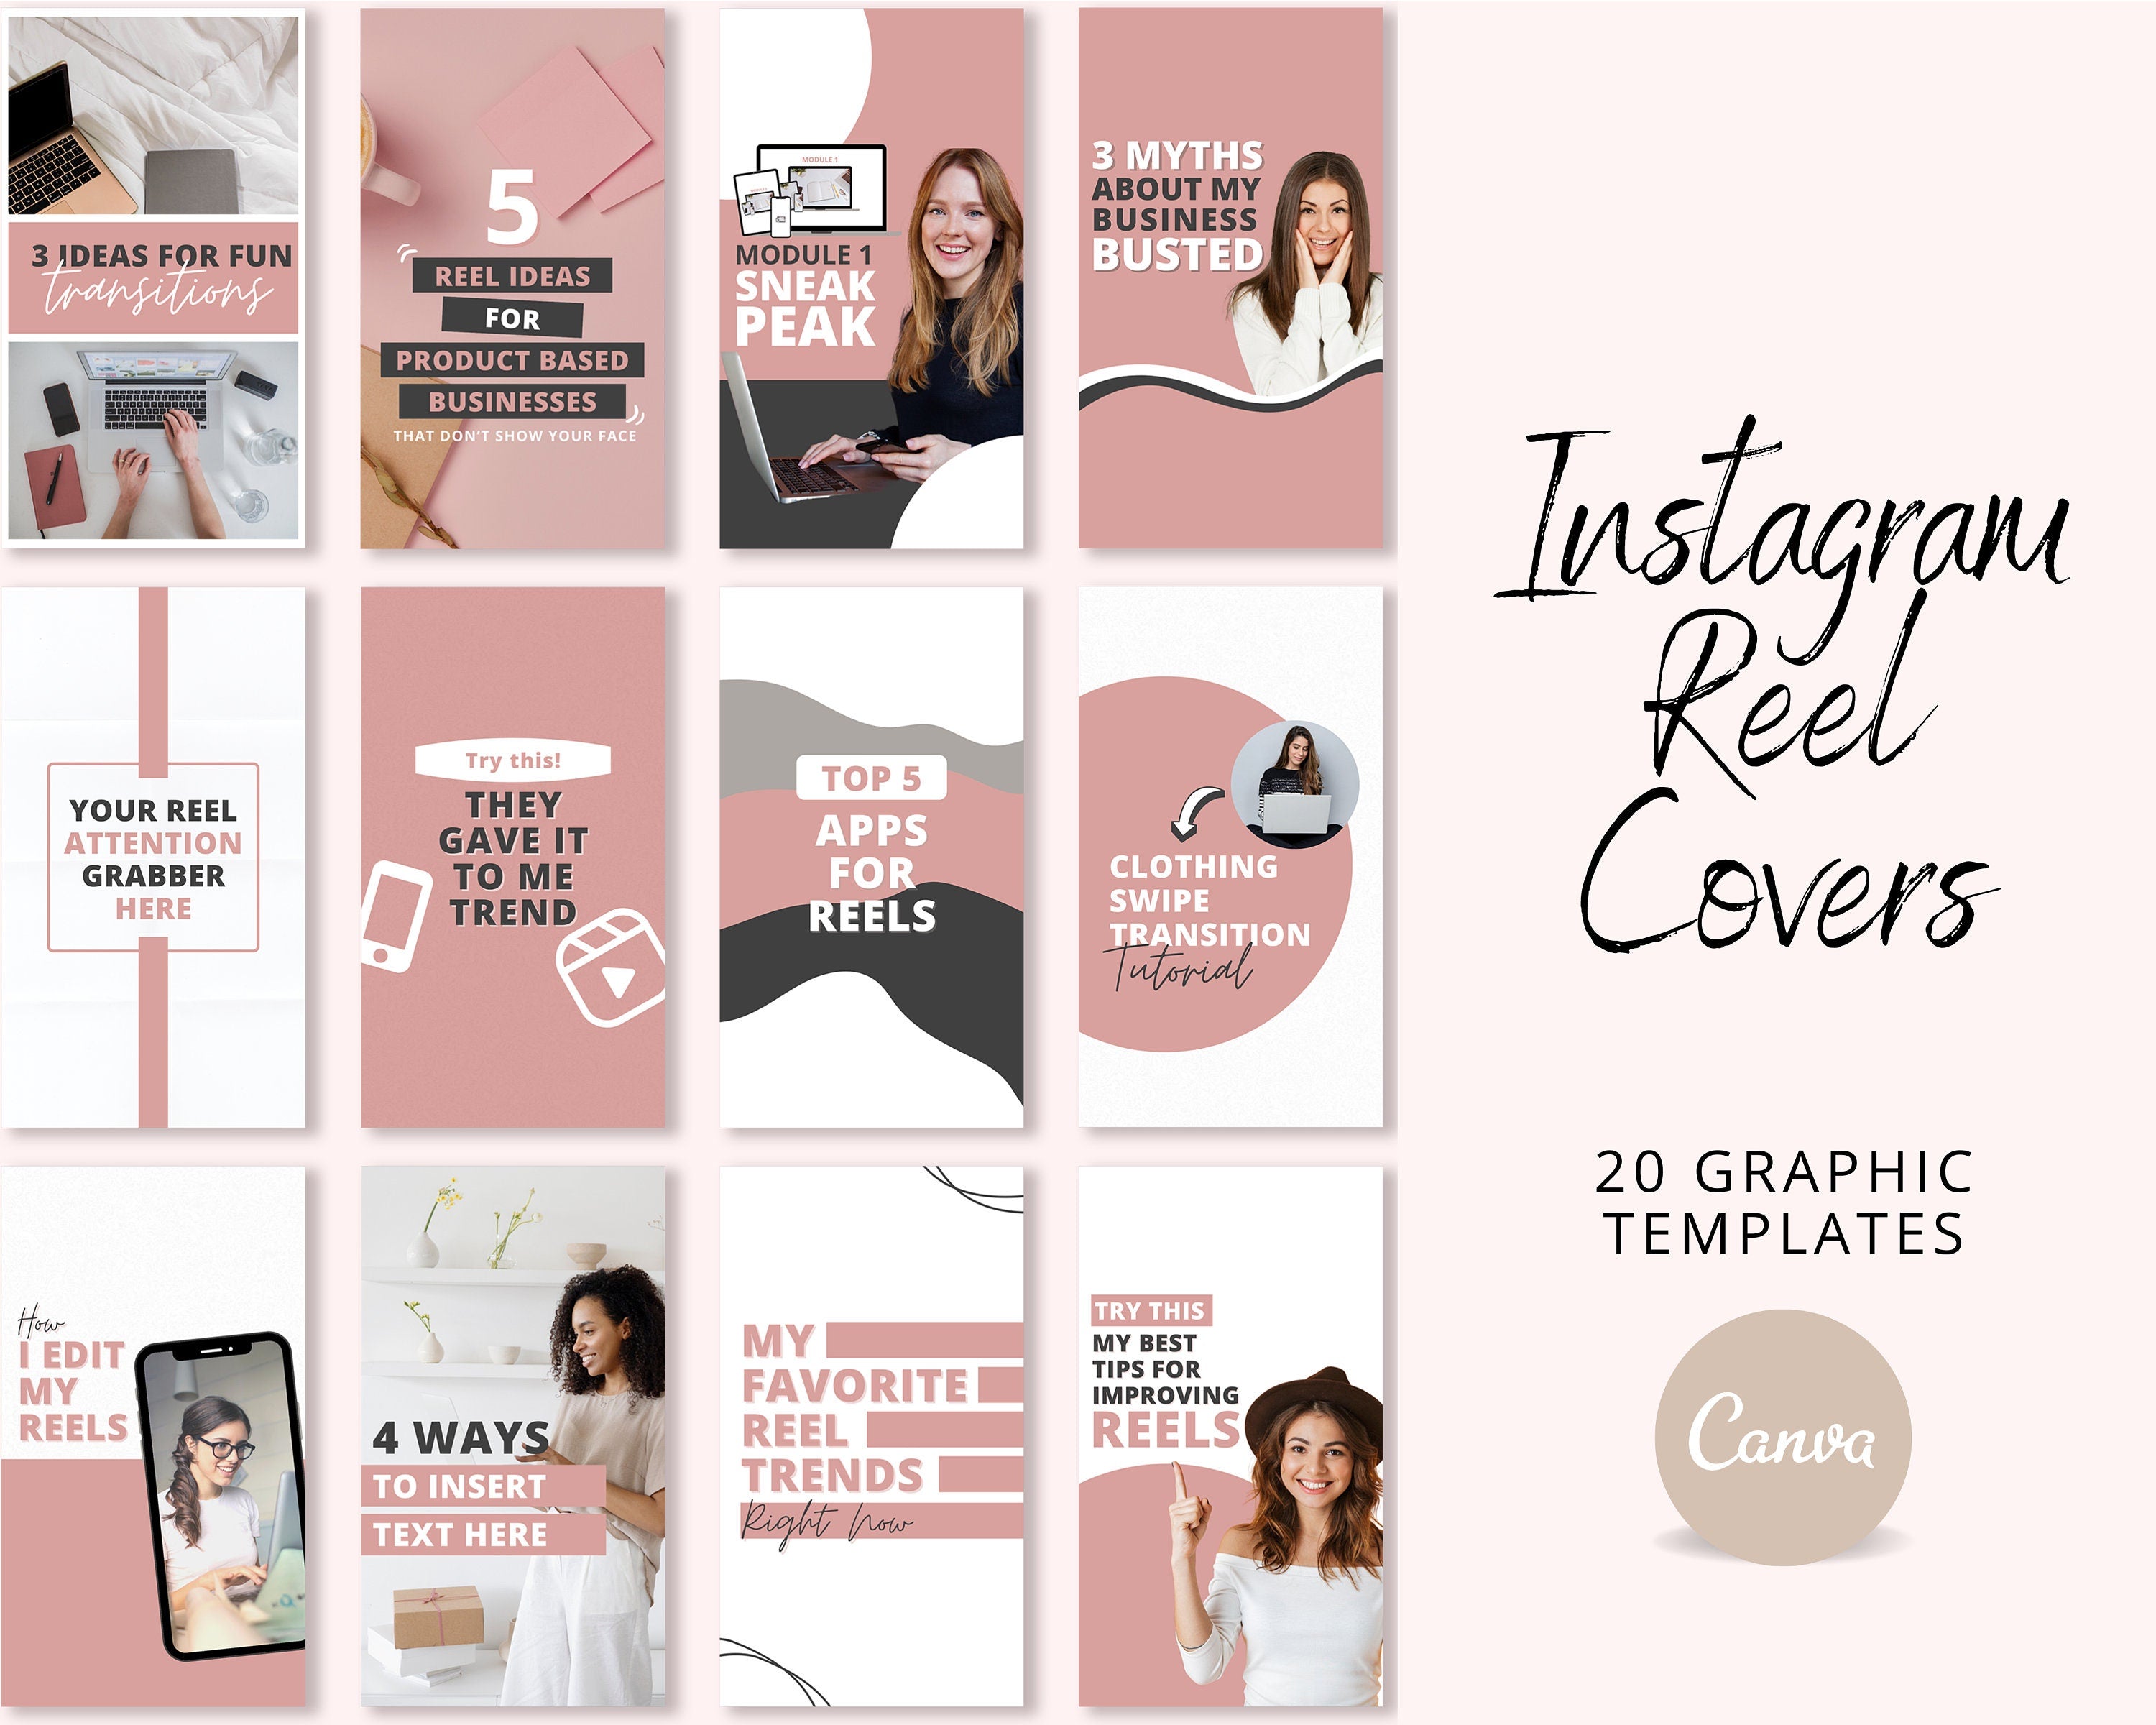 Reels Covers Templates Instagram Reels Thumbnails Editable in Canva